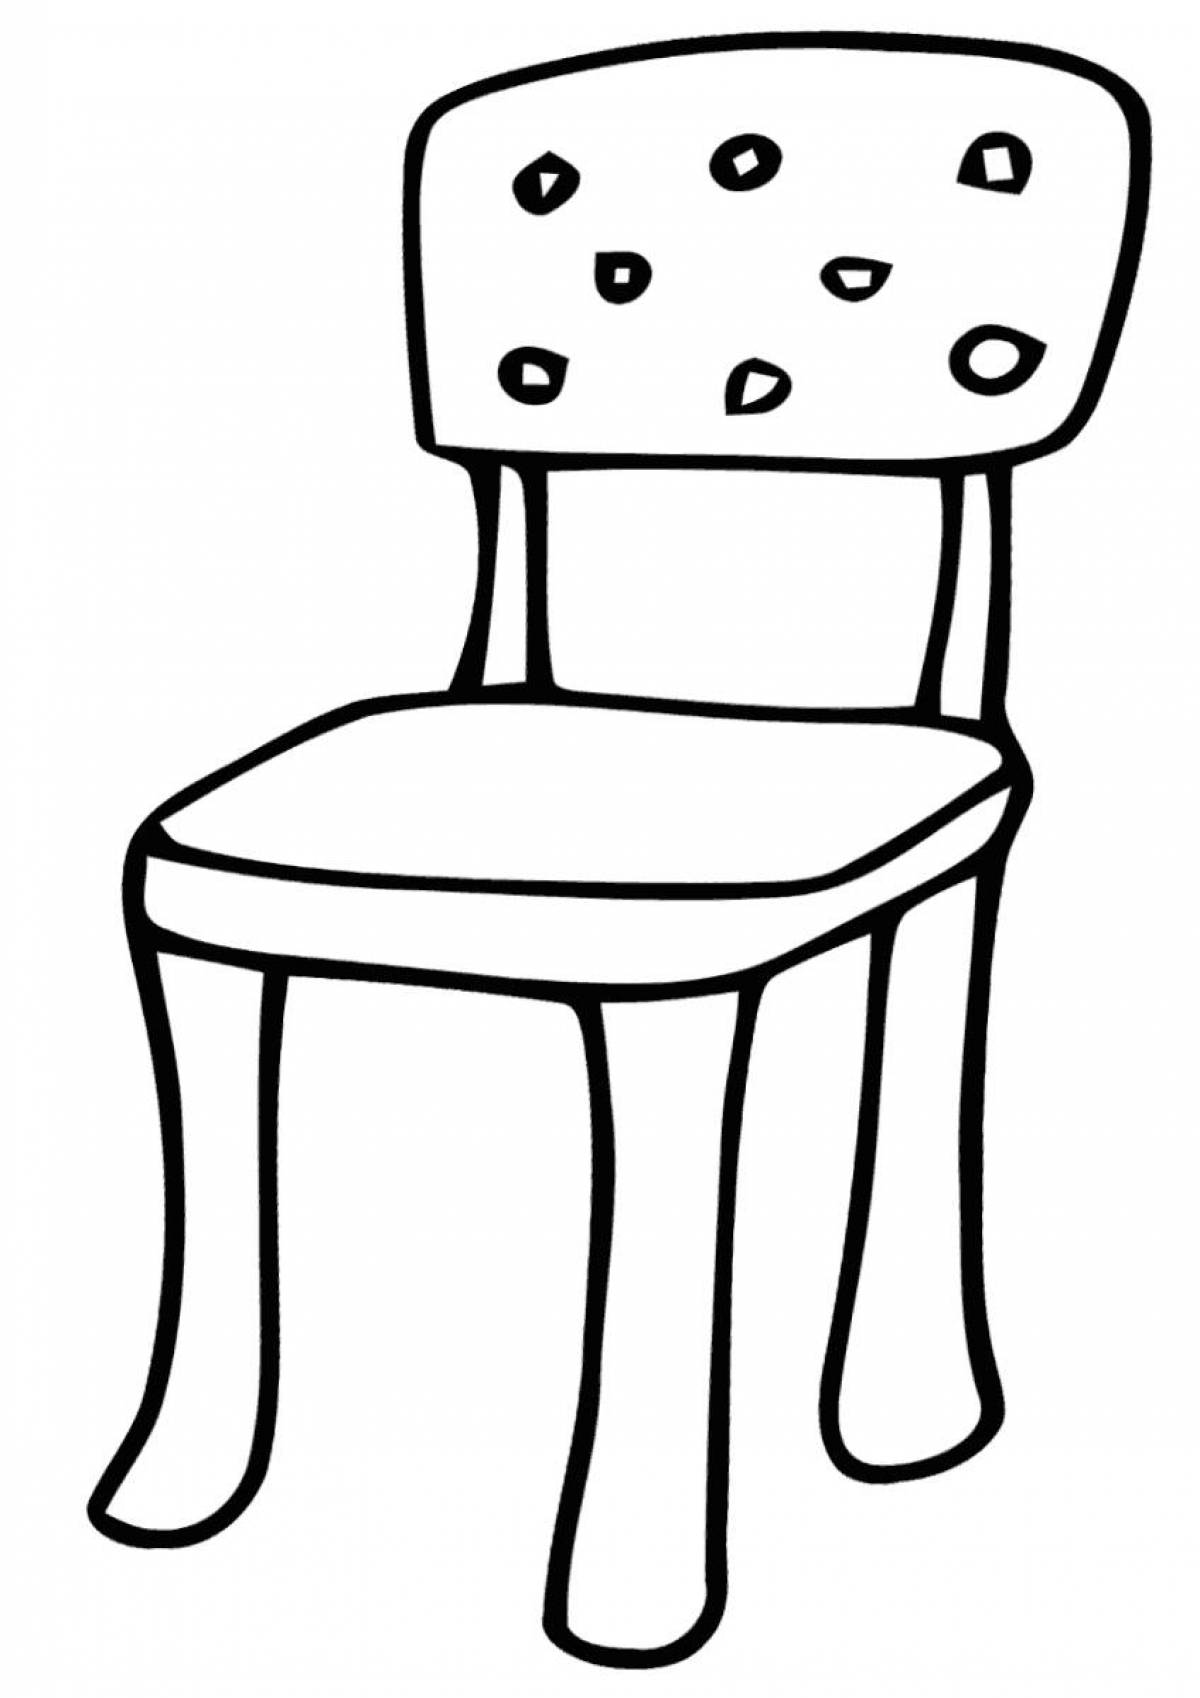 Furniture Color Explosion Coloring Page for 5-6 year olds